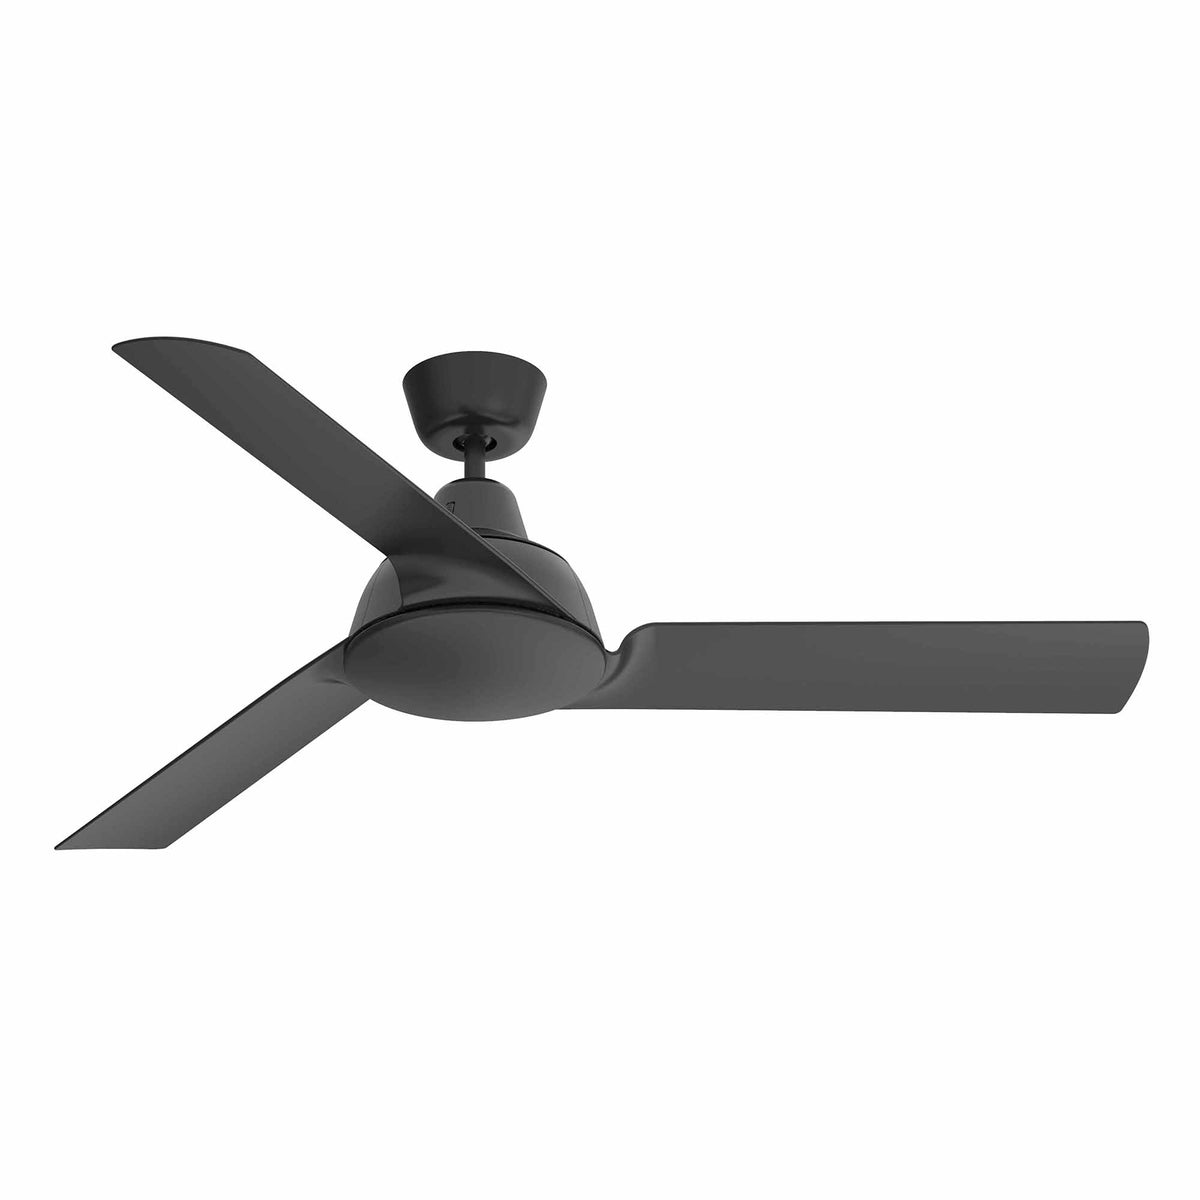 Airventure 52″ (1320mm) Ceiling Fan by Mercator – FC580133BK